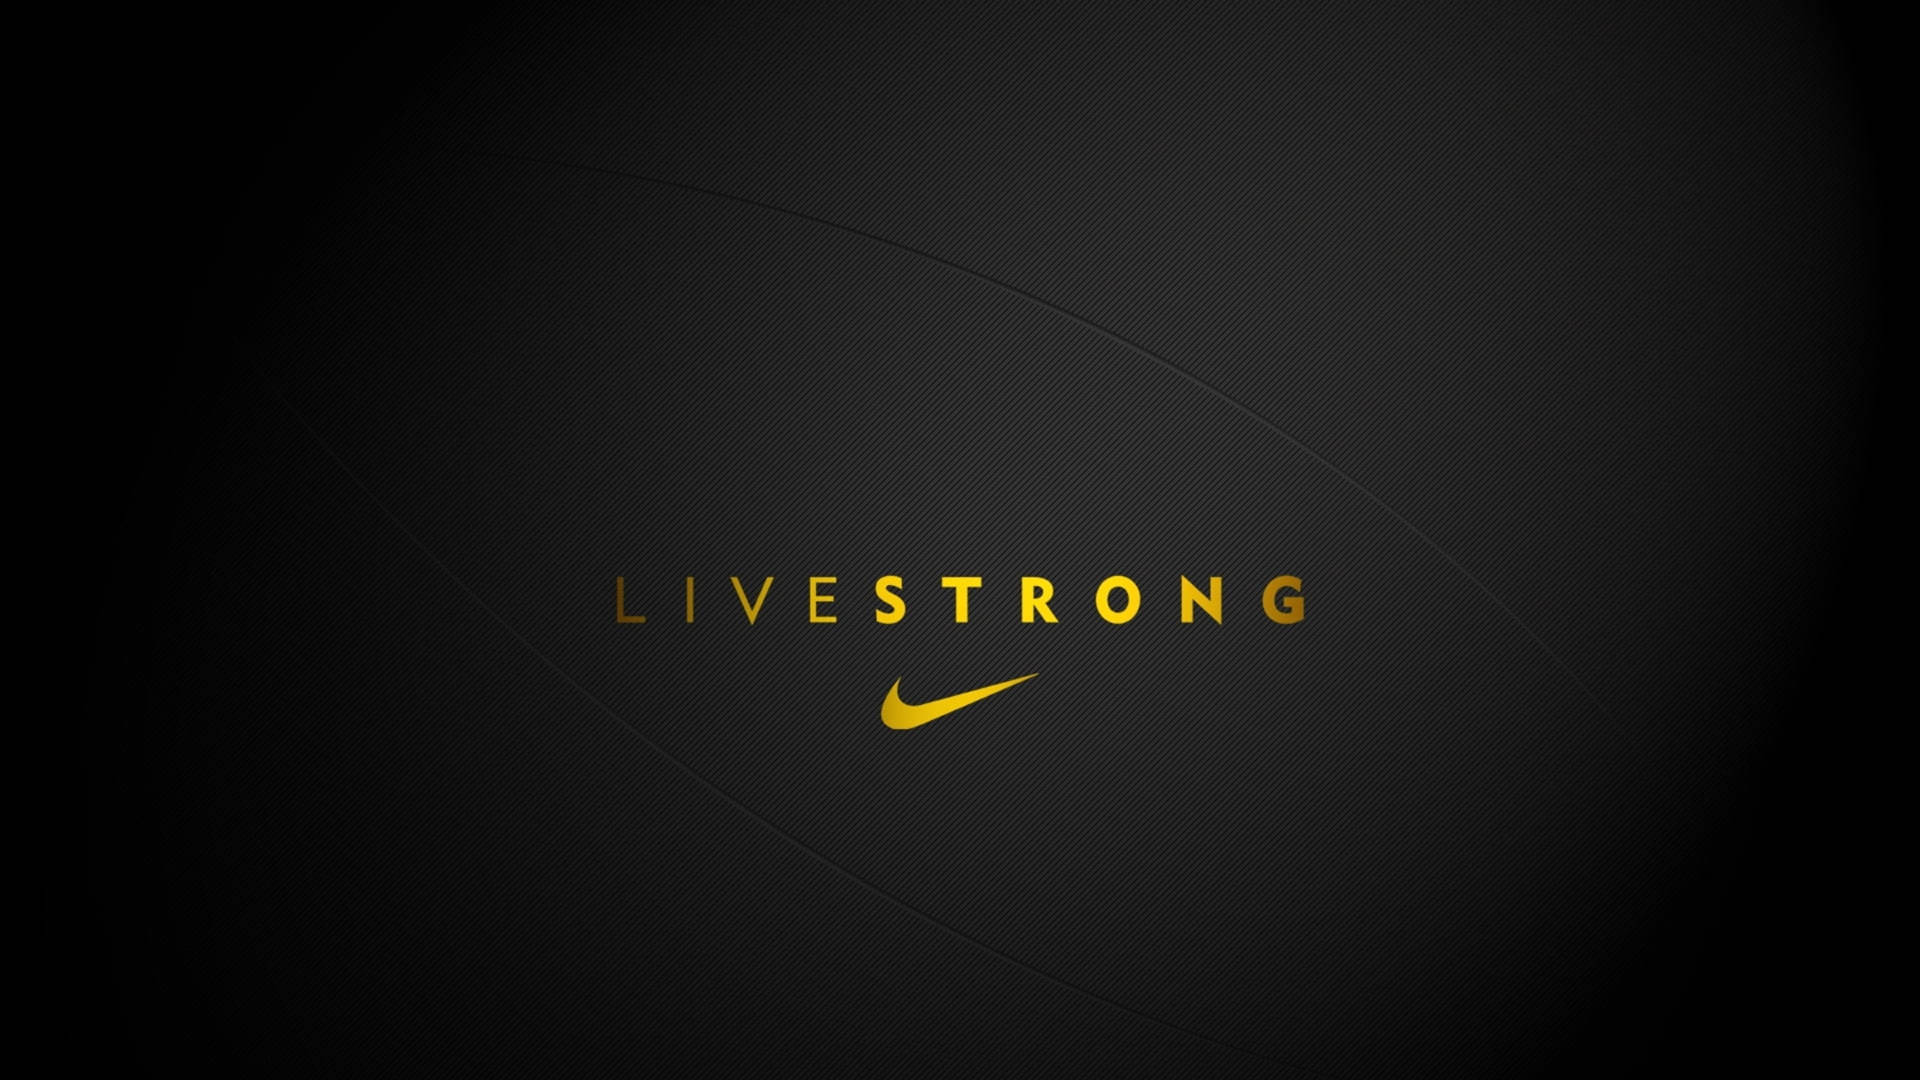 Black And Gold Nike Live Strong Wallpaper